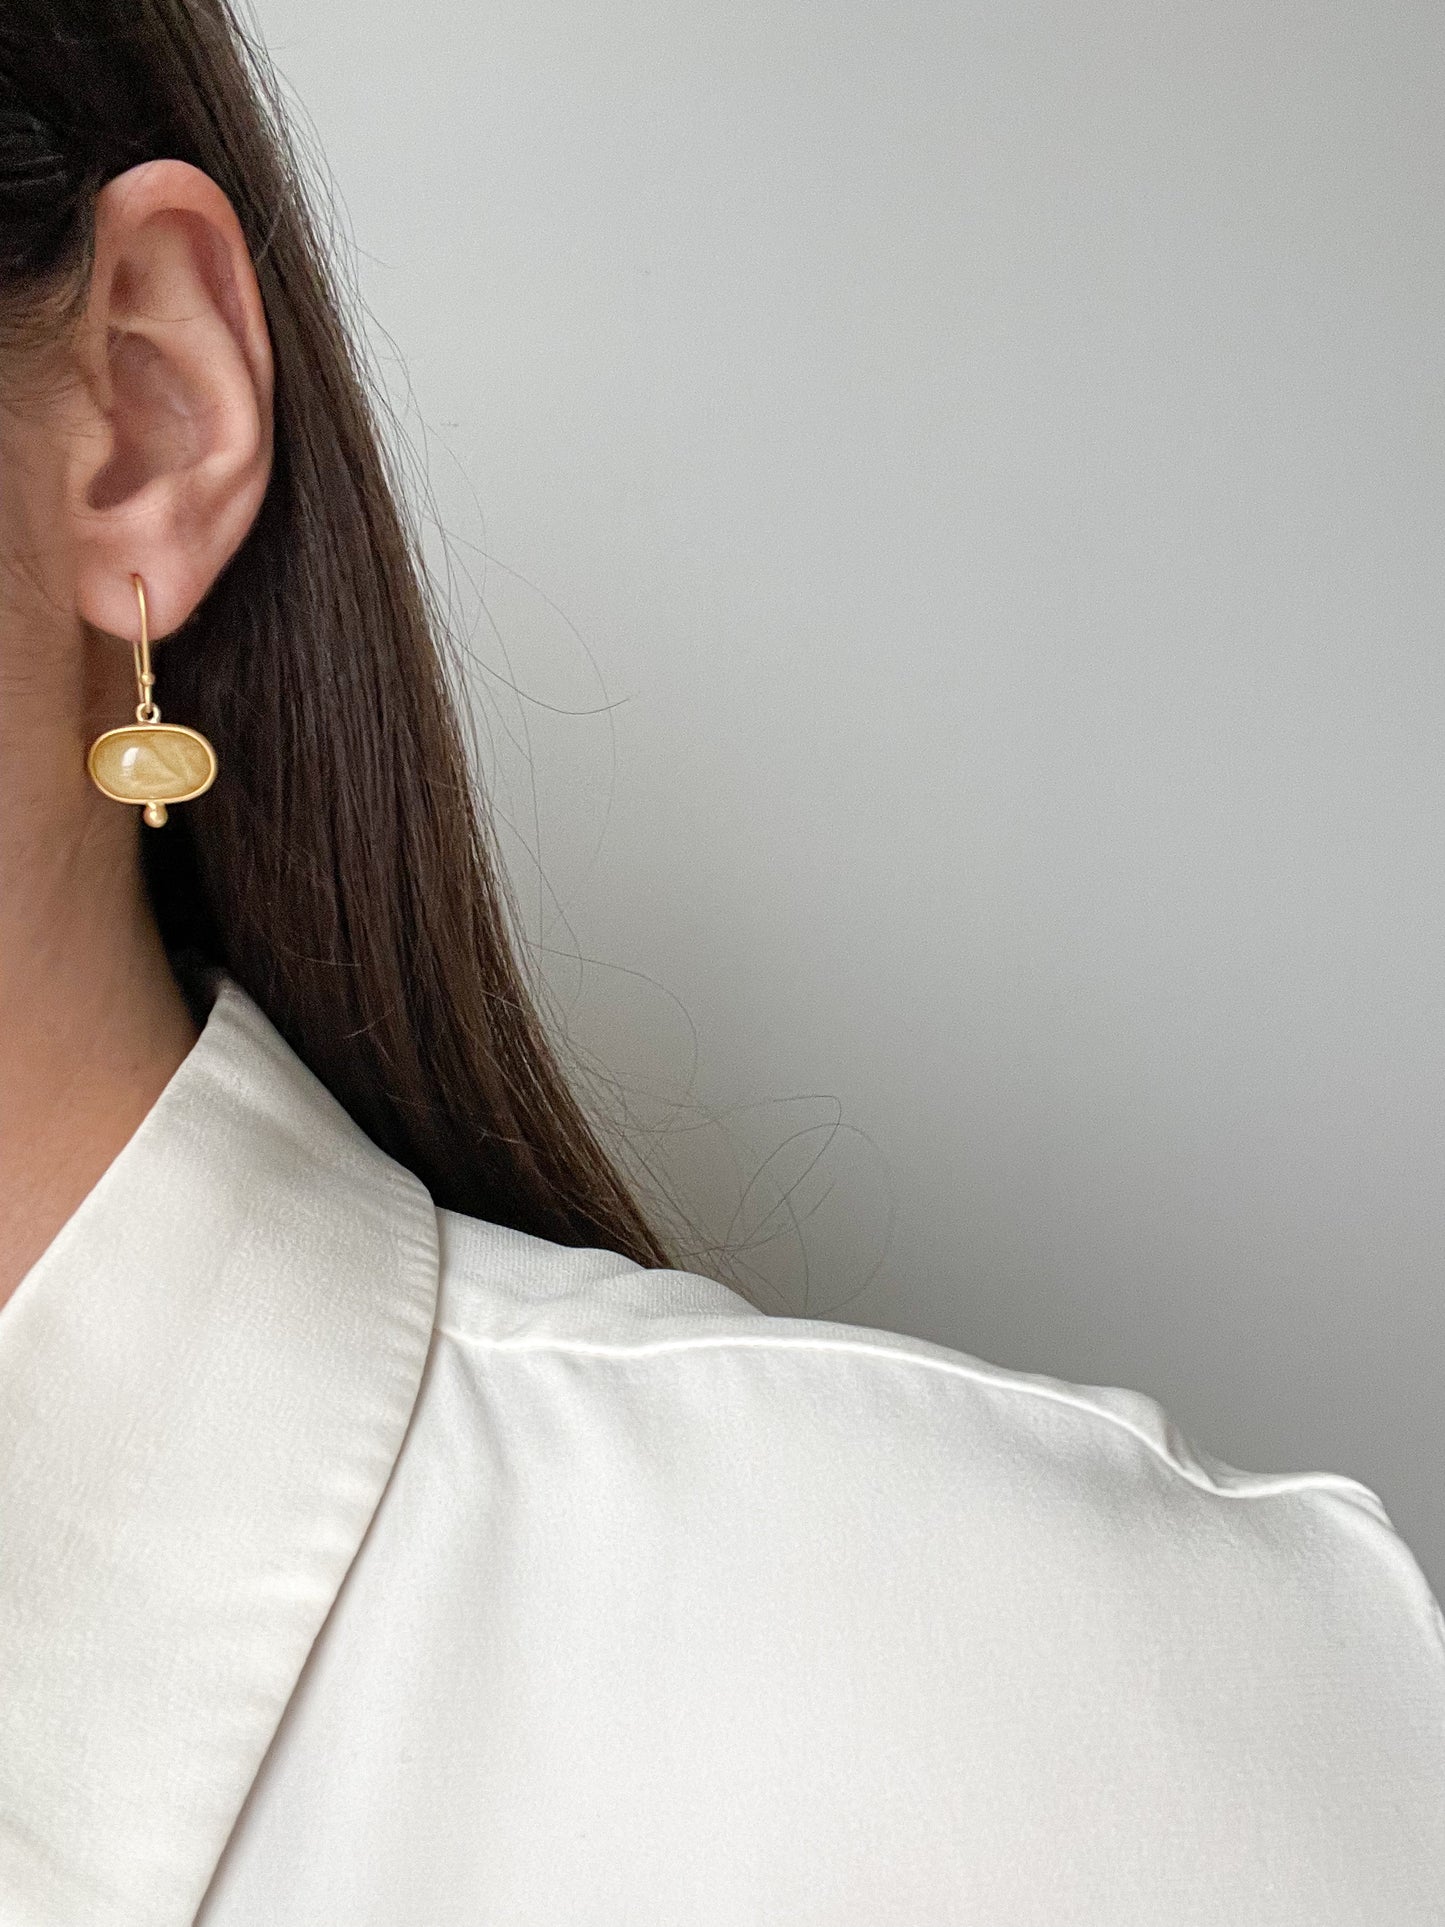 Mate amber earrings - Gold plated silver - Hook earrings collection